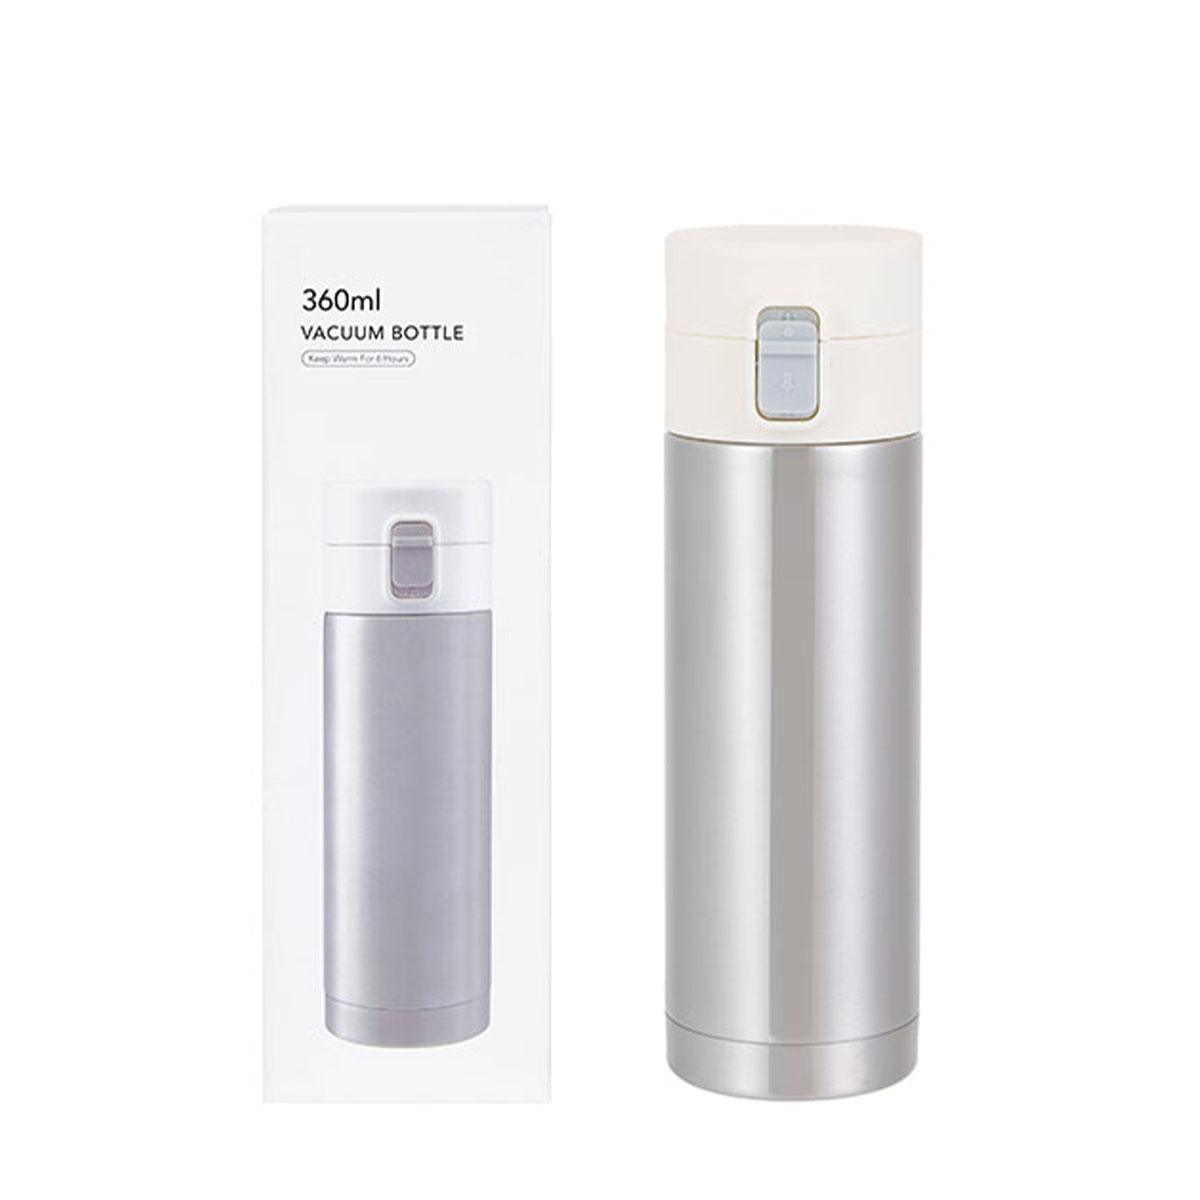 

MINISO 360ml Portable Thermos Cup Stainless Steel Vacuum Flask Thermo Water Bottle Insulated Cup Coffee Mug for Home Office Travel